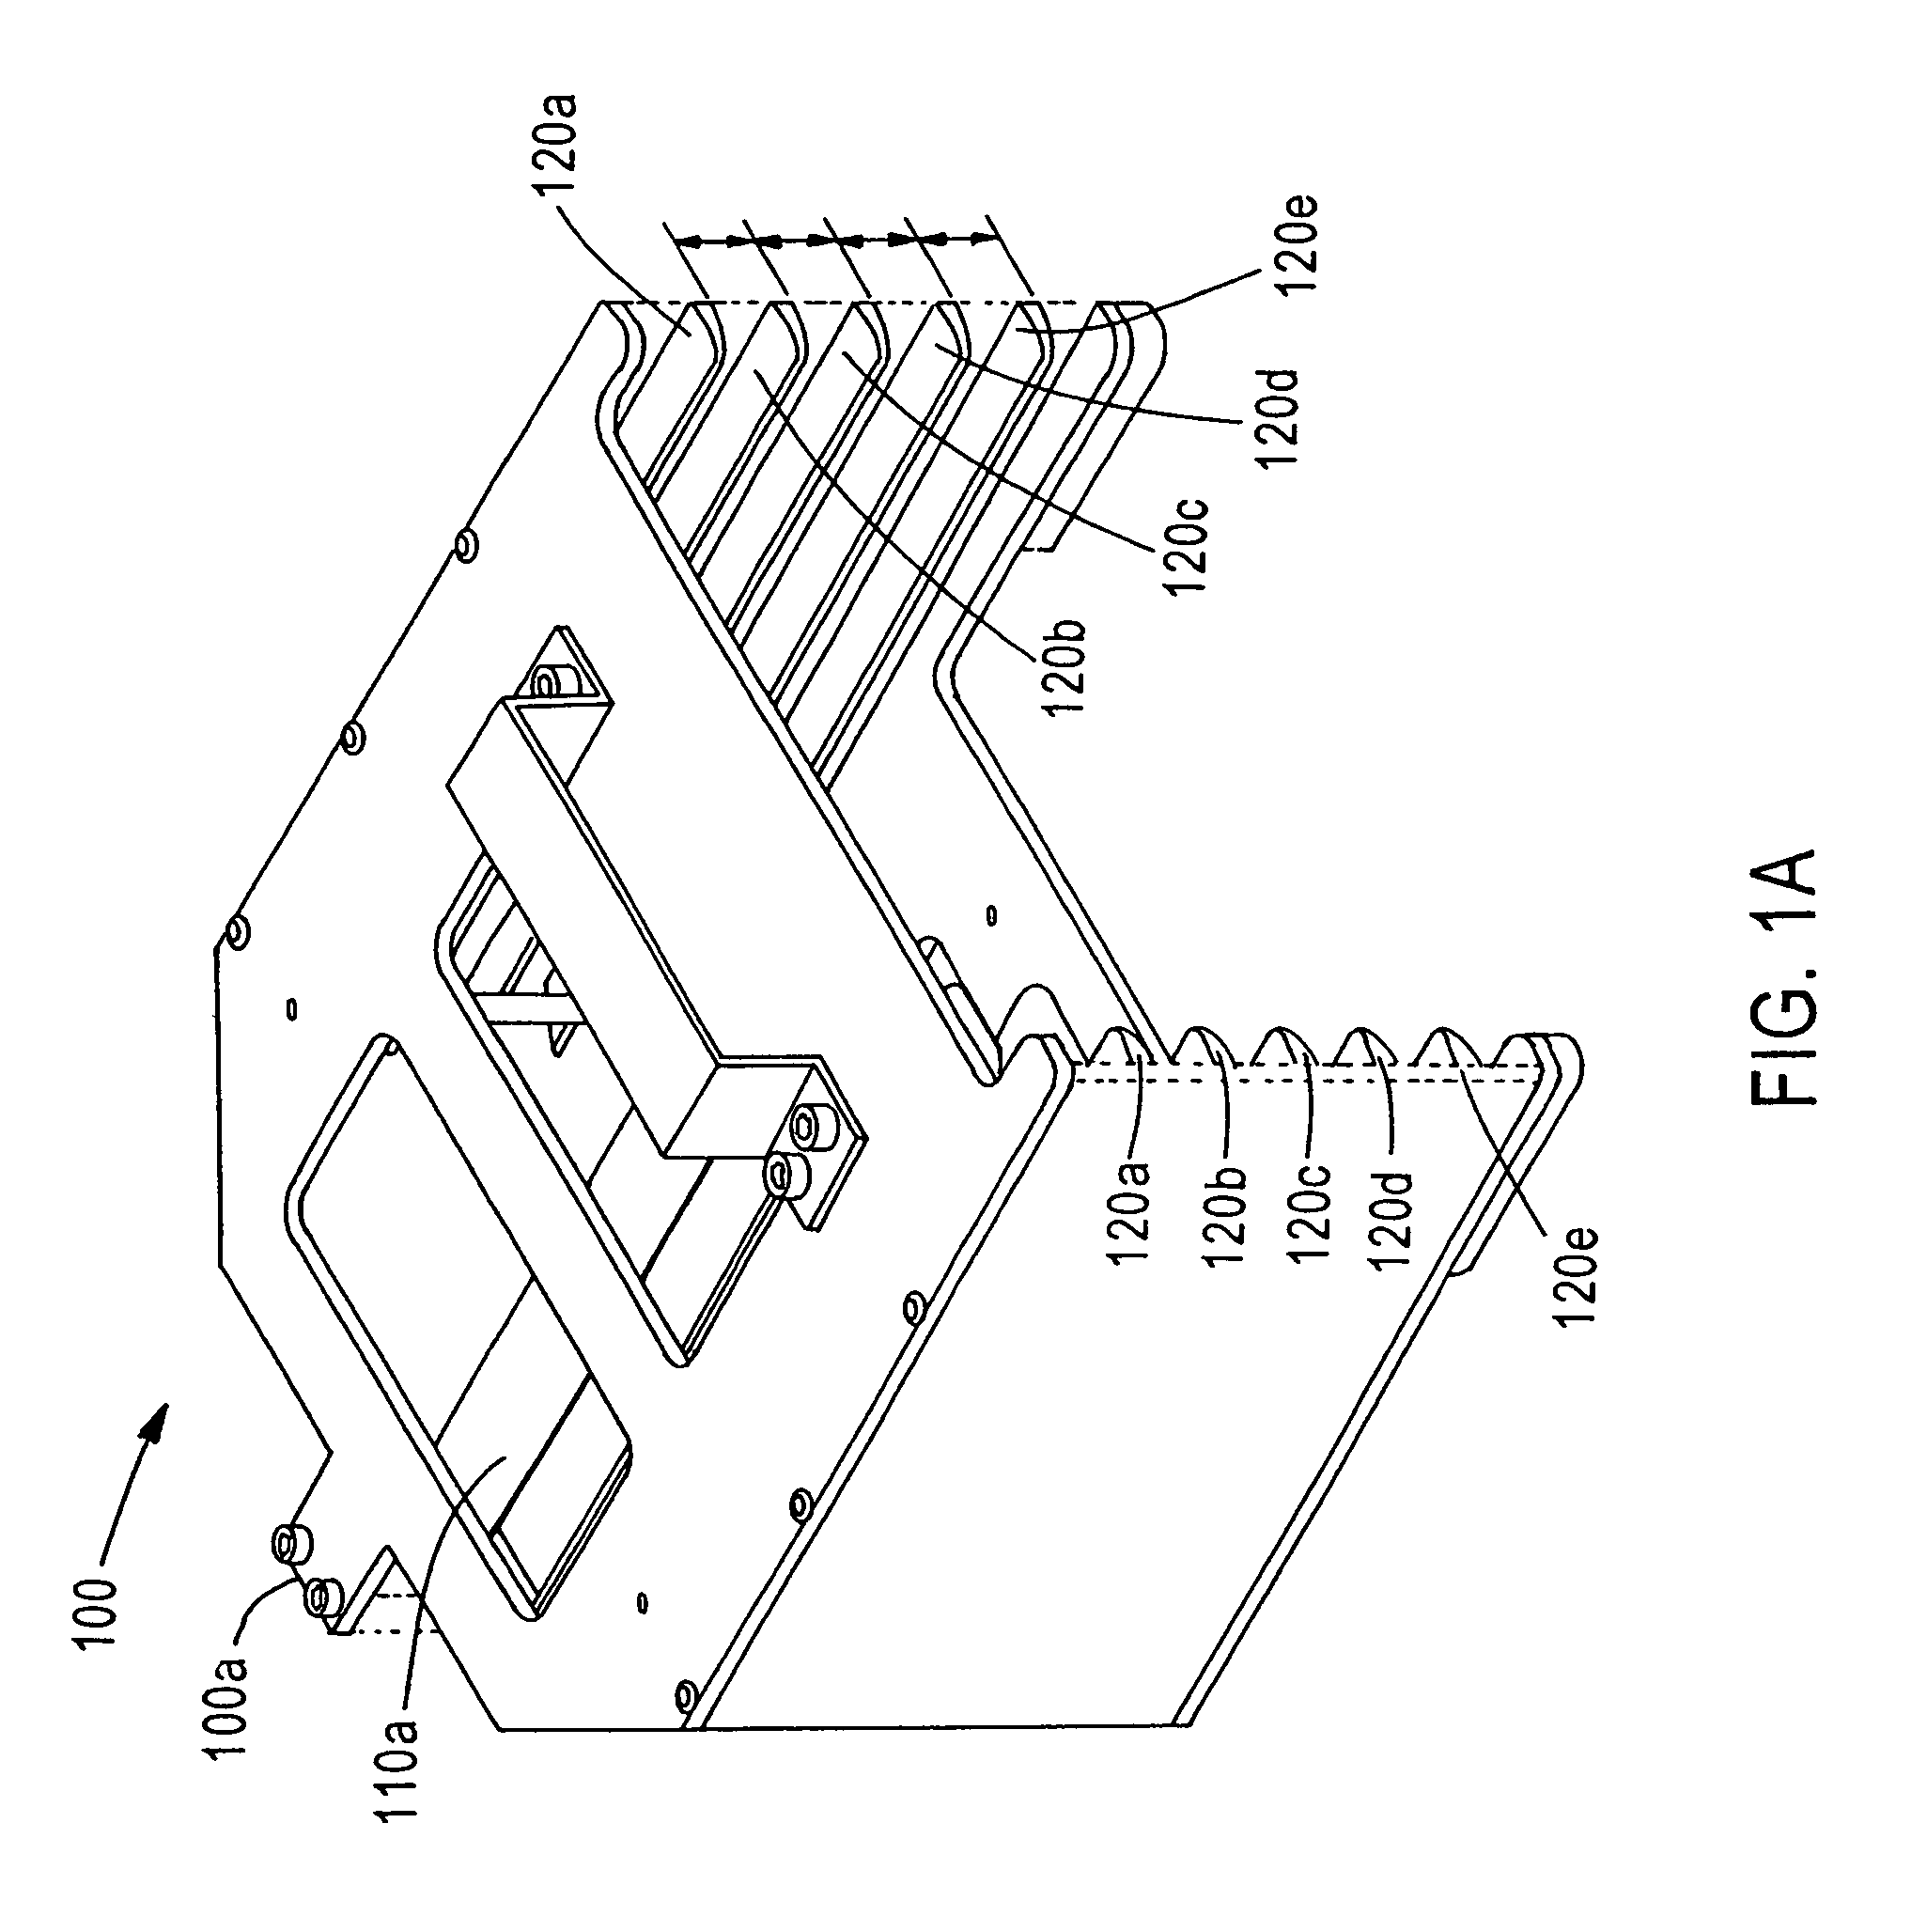 Method and apparatus for handling thin semiconductor wafers